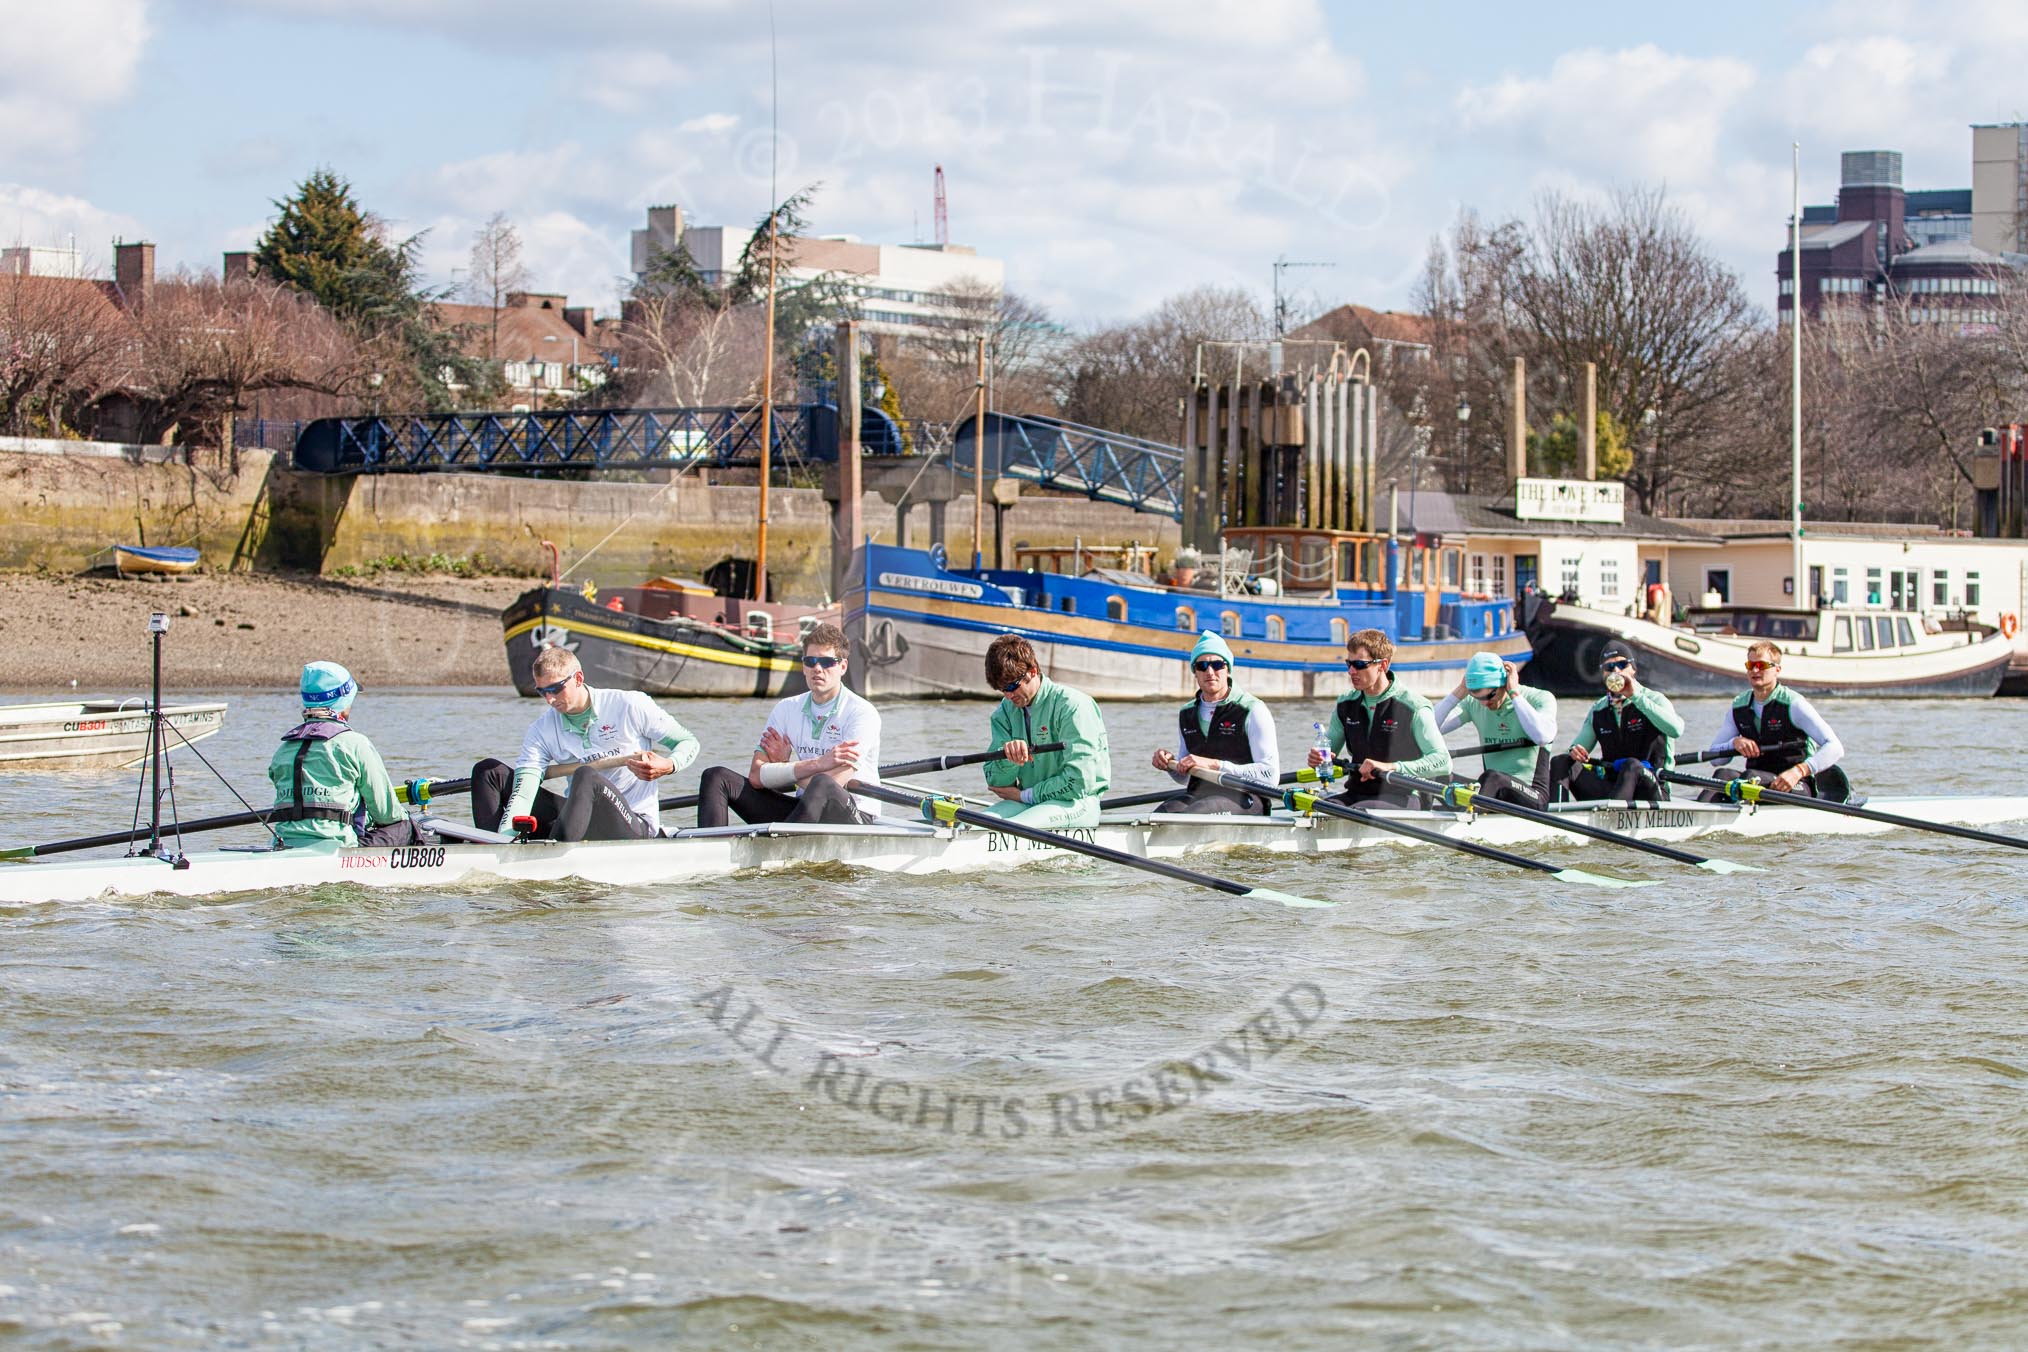 The Boat Race season 2013 -  Tideway Week (Friday) and press conferences.
River Thames,
London SW15,

United Kingdom,
on 29 March 2013 at 10:35, image #28